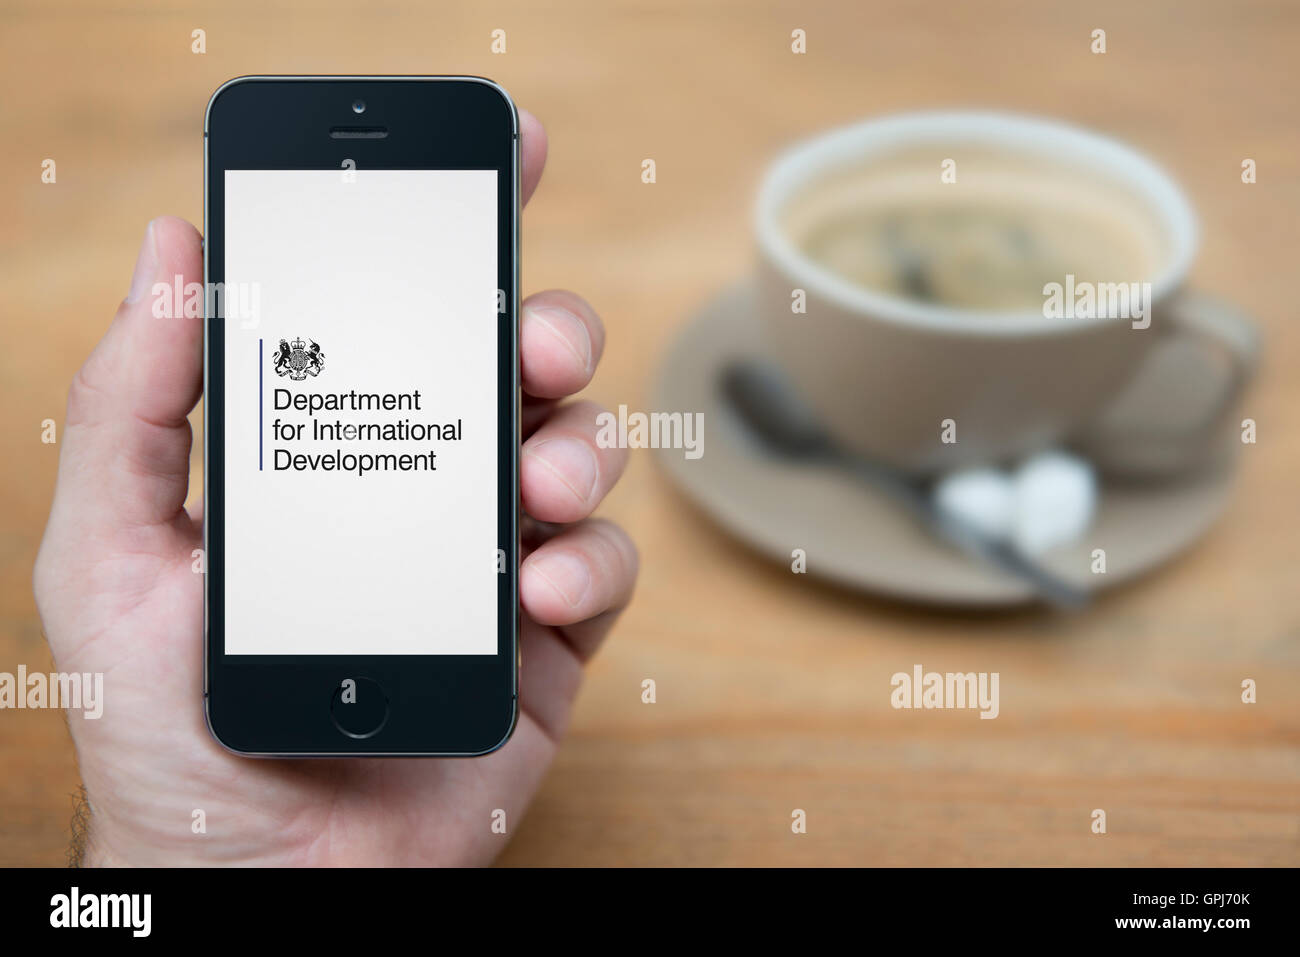 A man looks at his iPhone which displays the UK Government Department for International Development logo (Editorial use only). Stock Photo